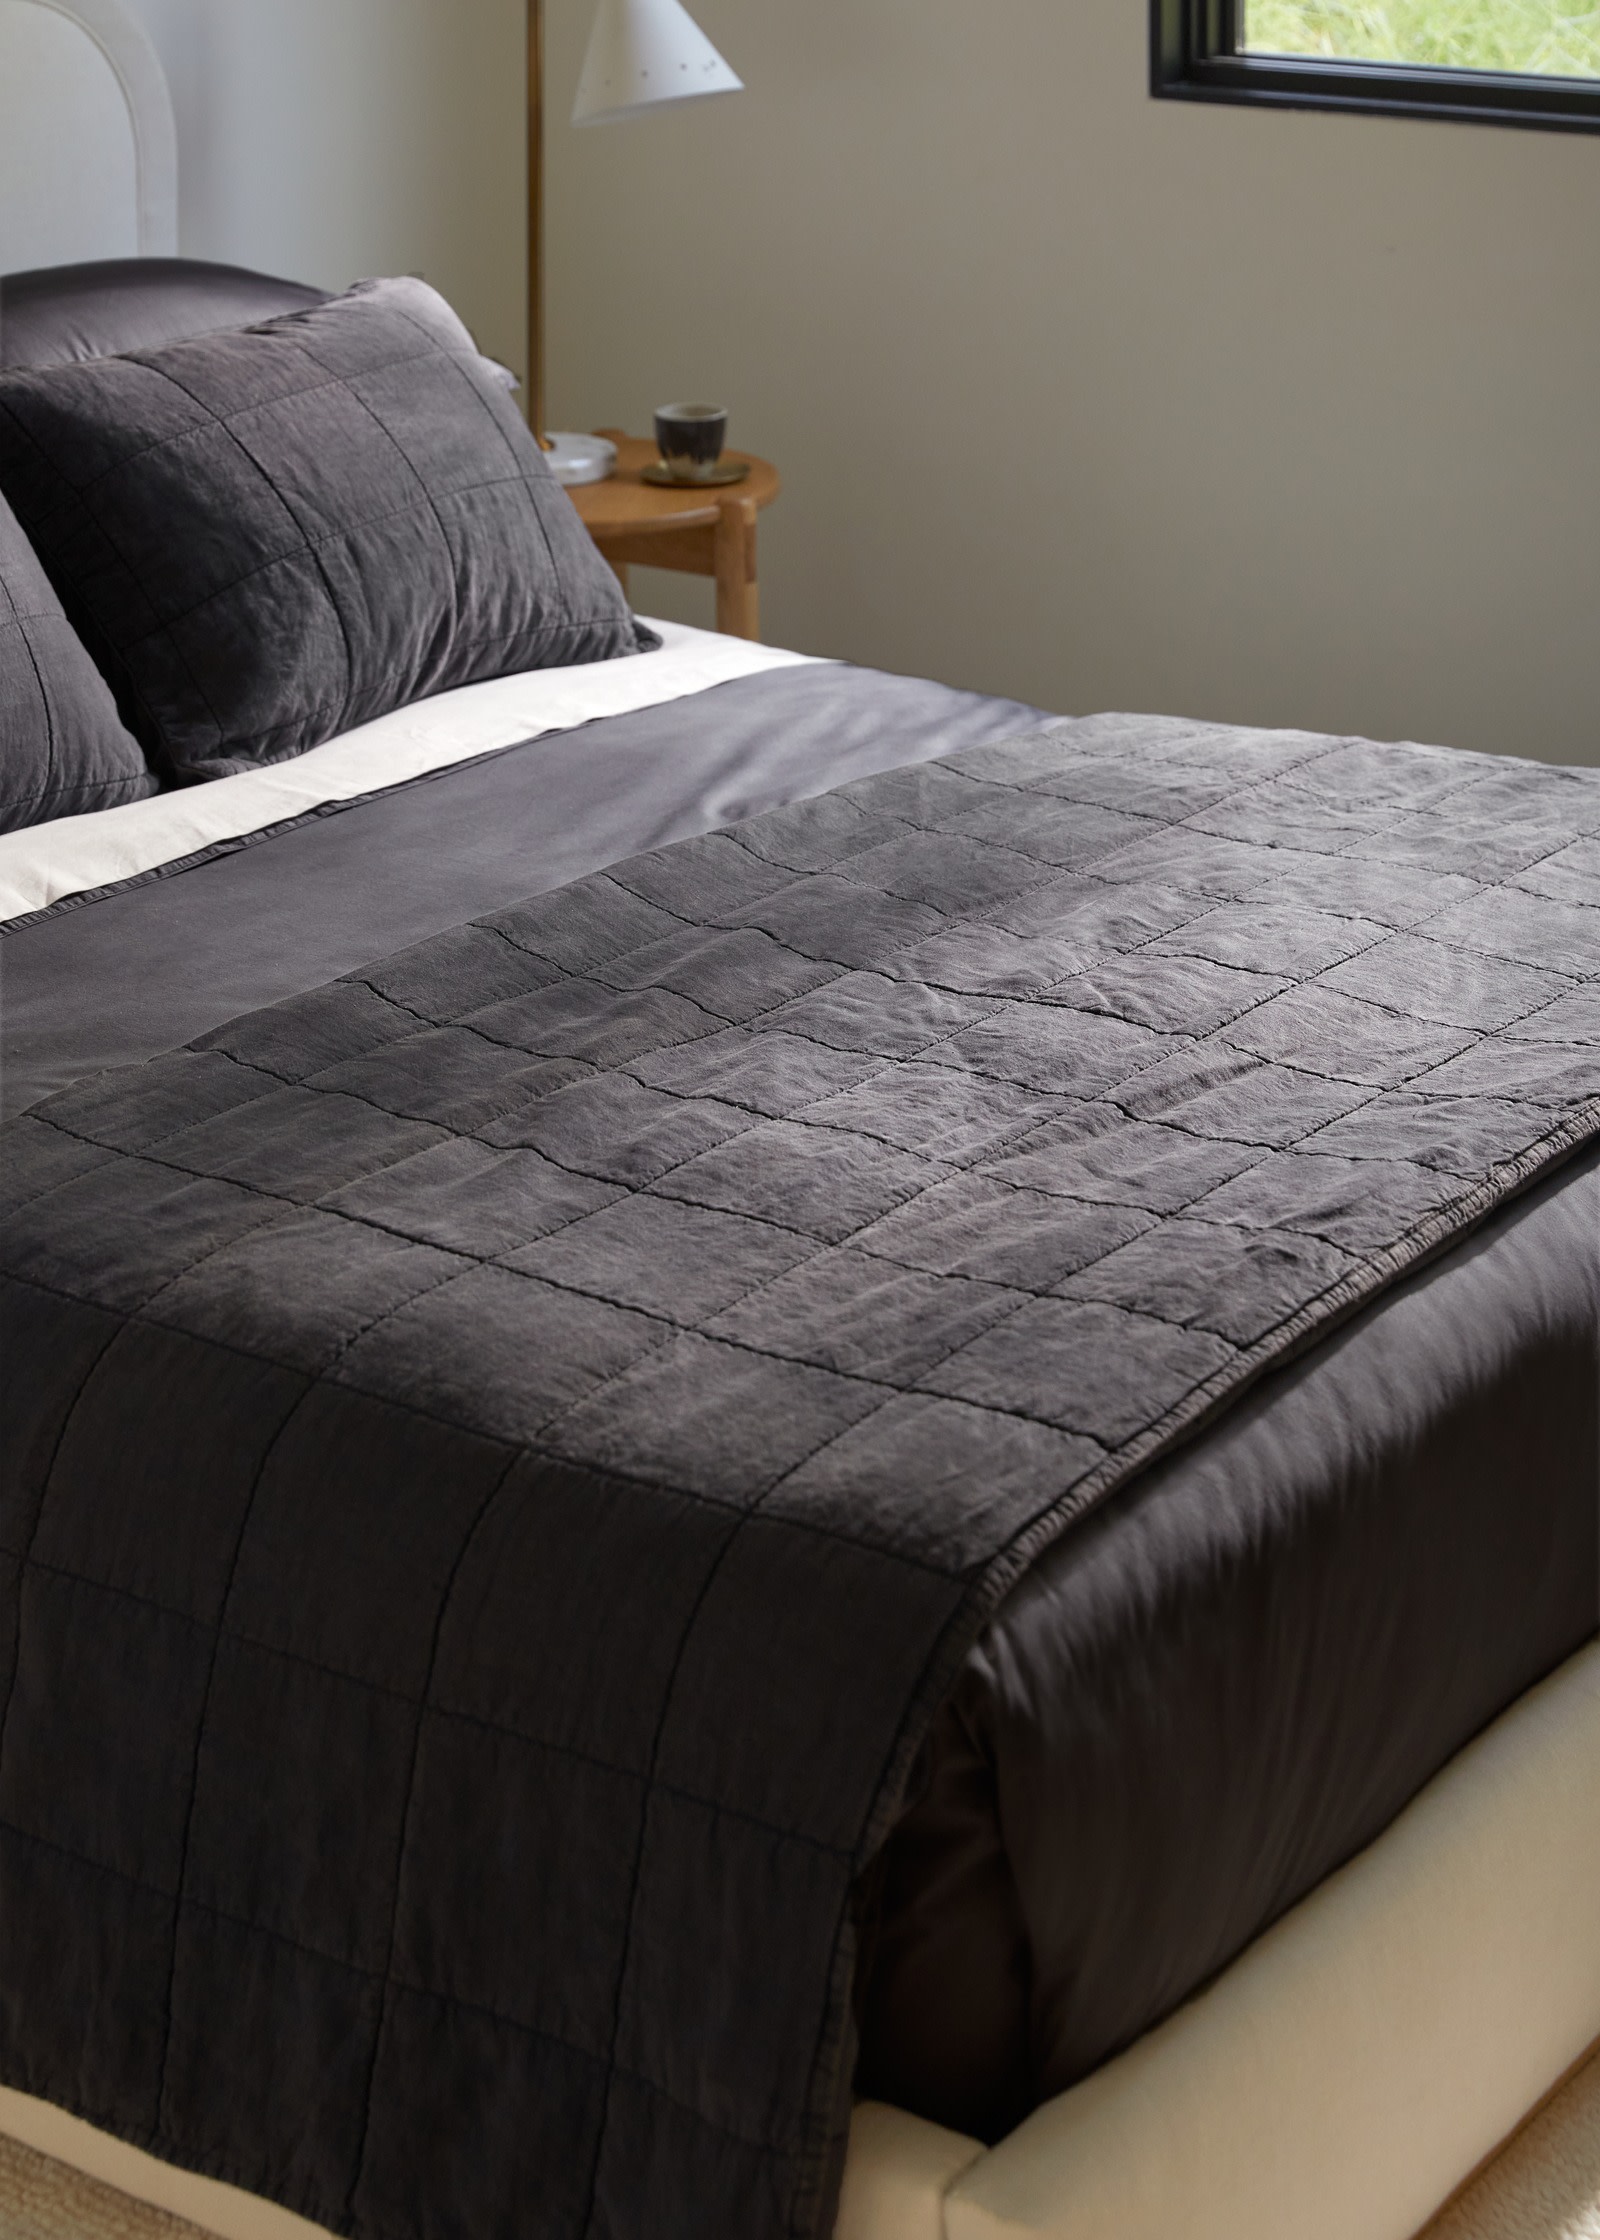 A dark grey coal linen quilt with a box pattern folded neatly at the foot of a bed